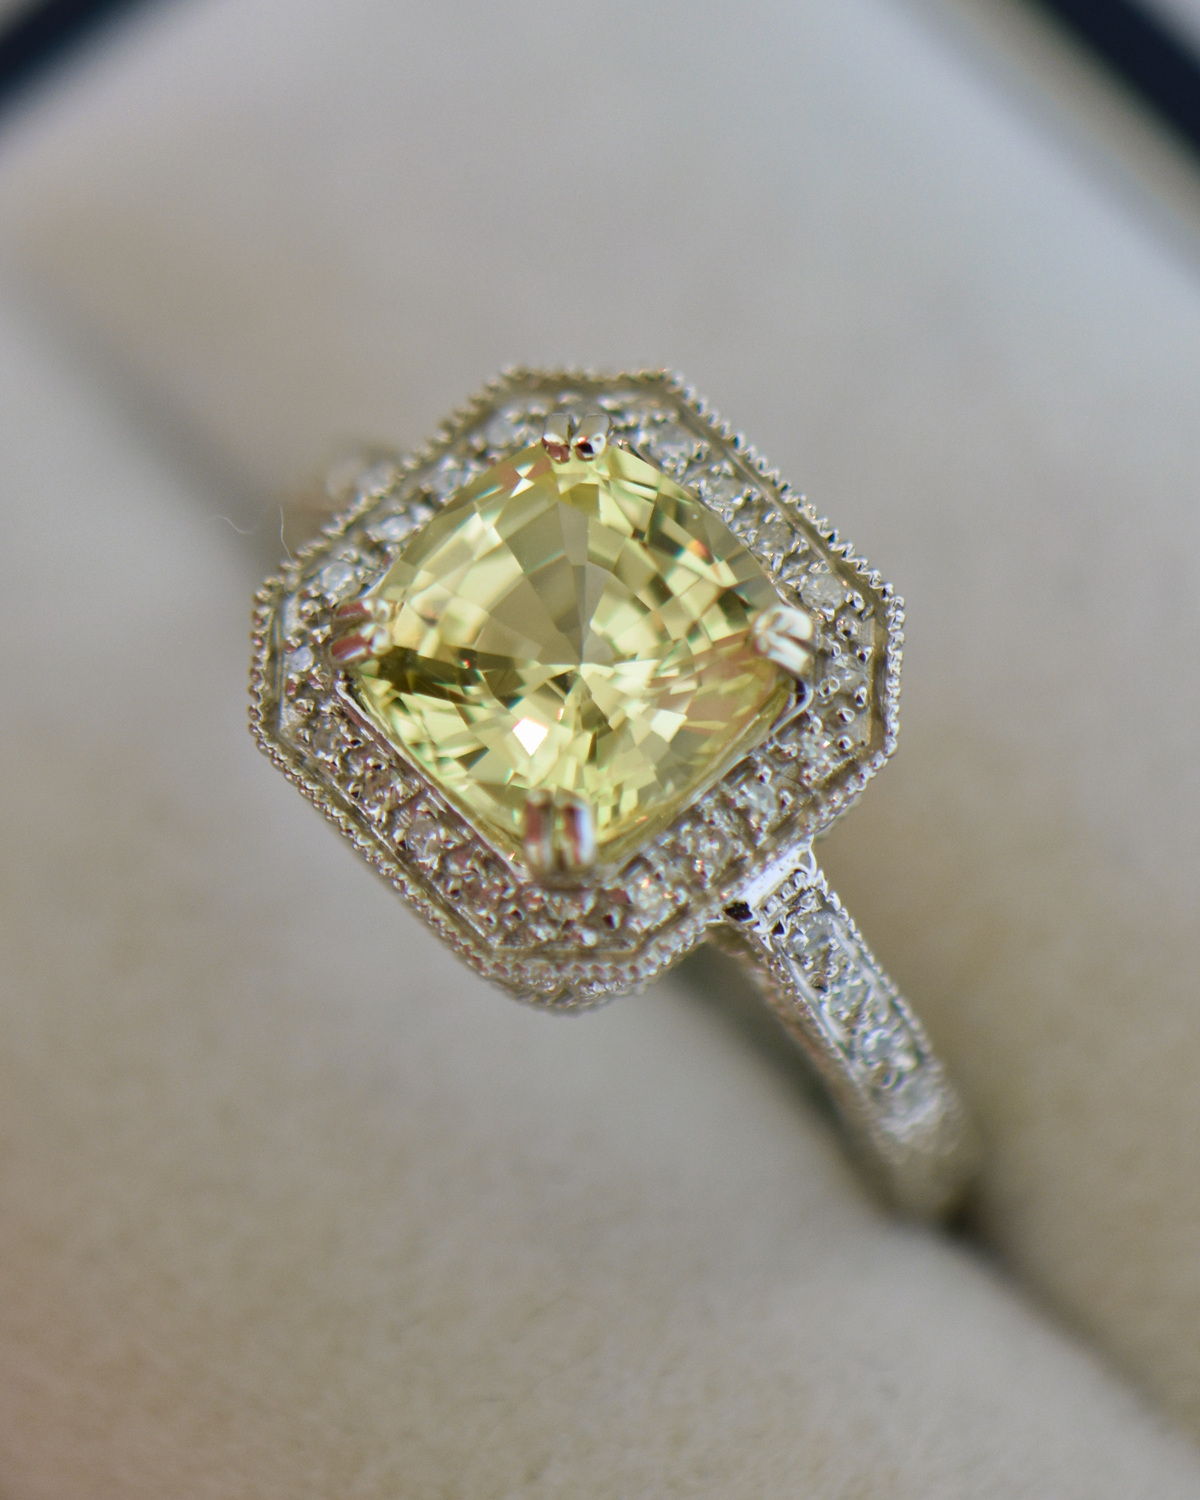 Golden Canary Sapphire Solitaire Diamond Engagement Ring C1950